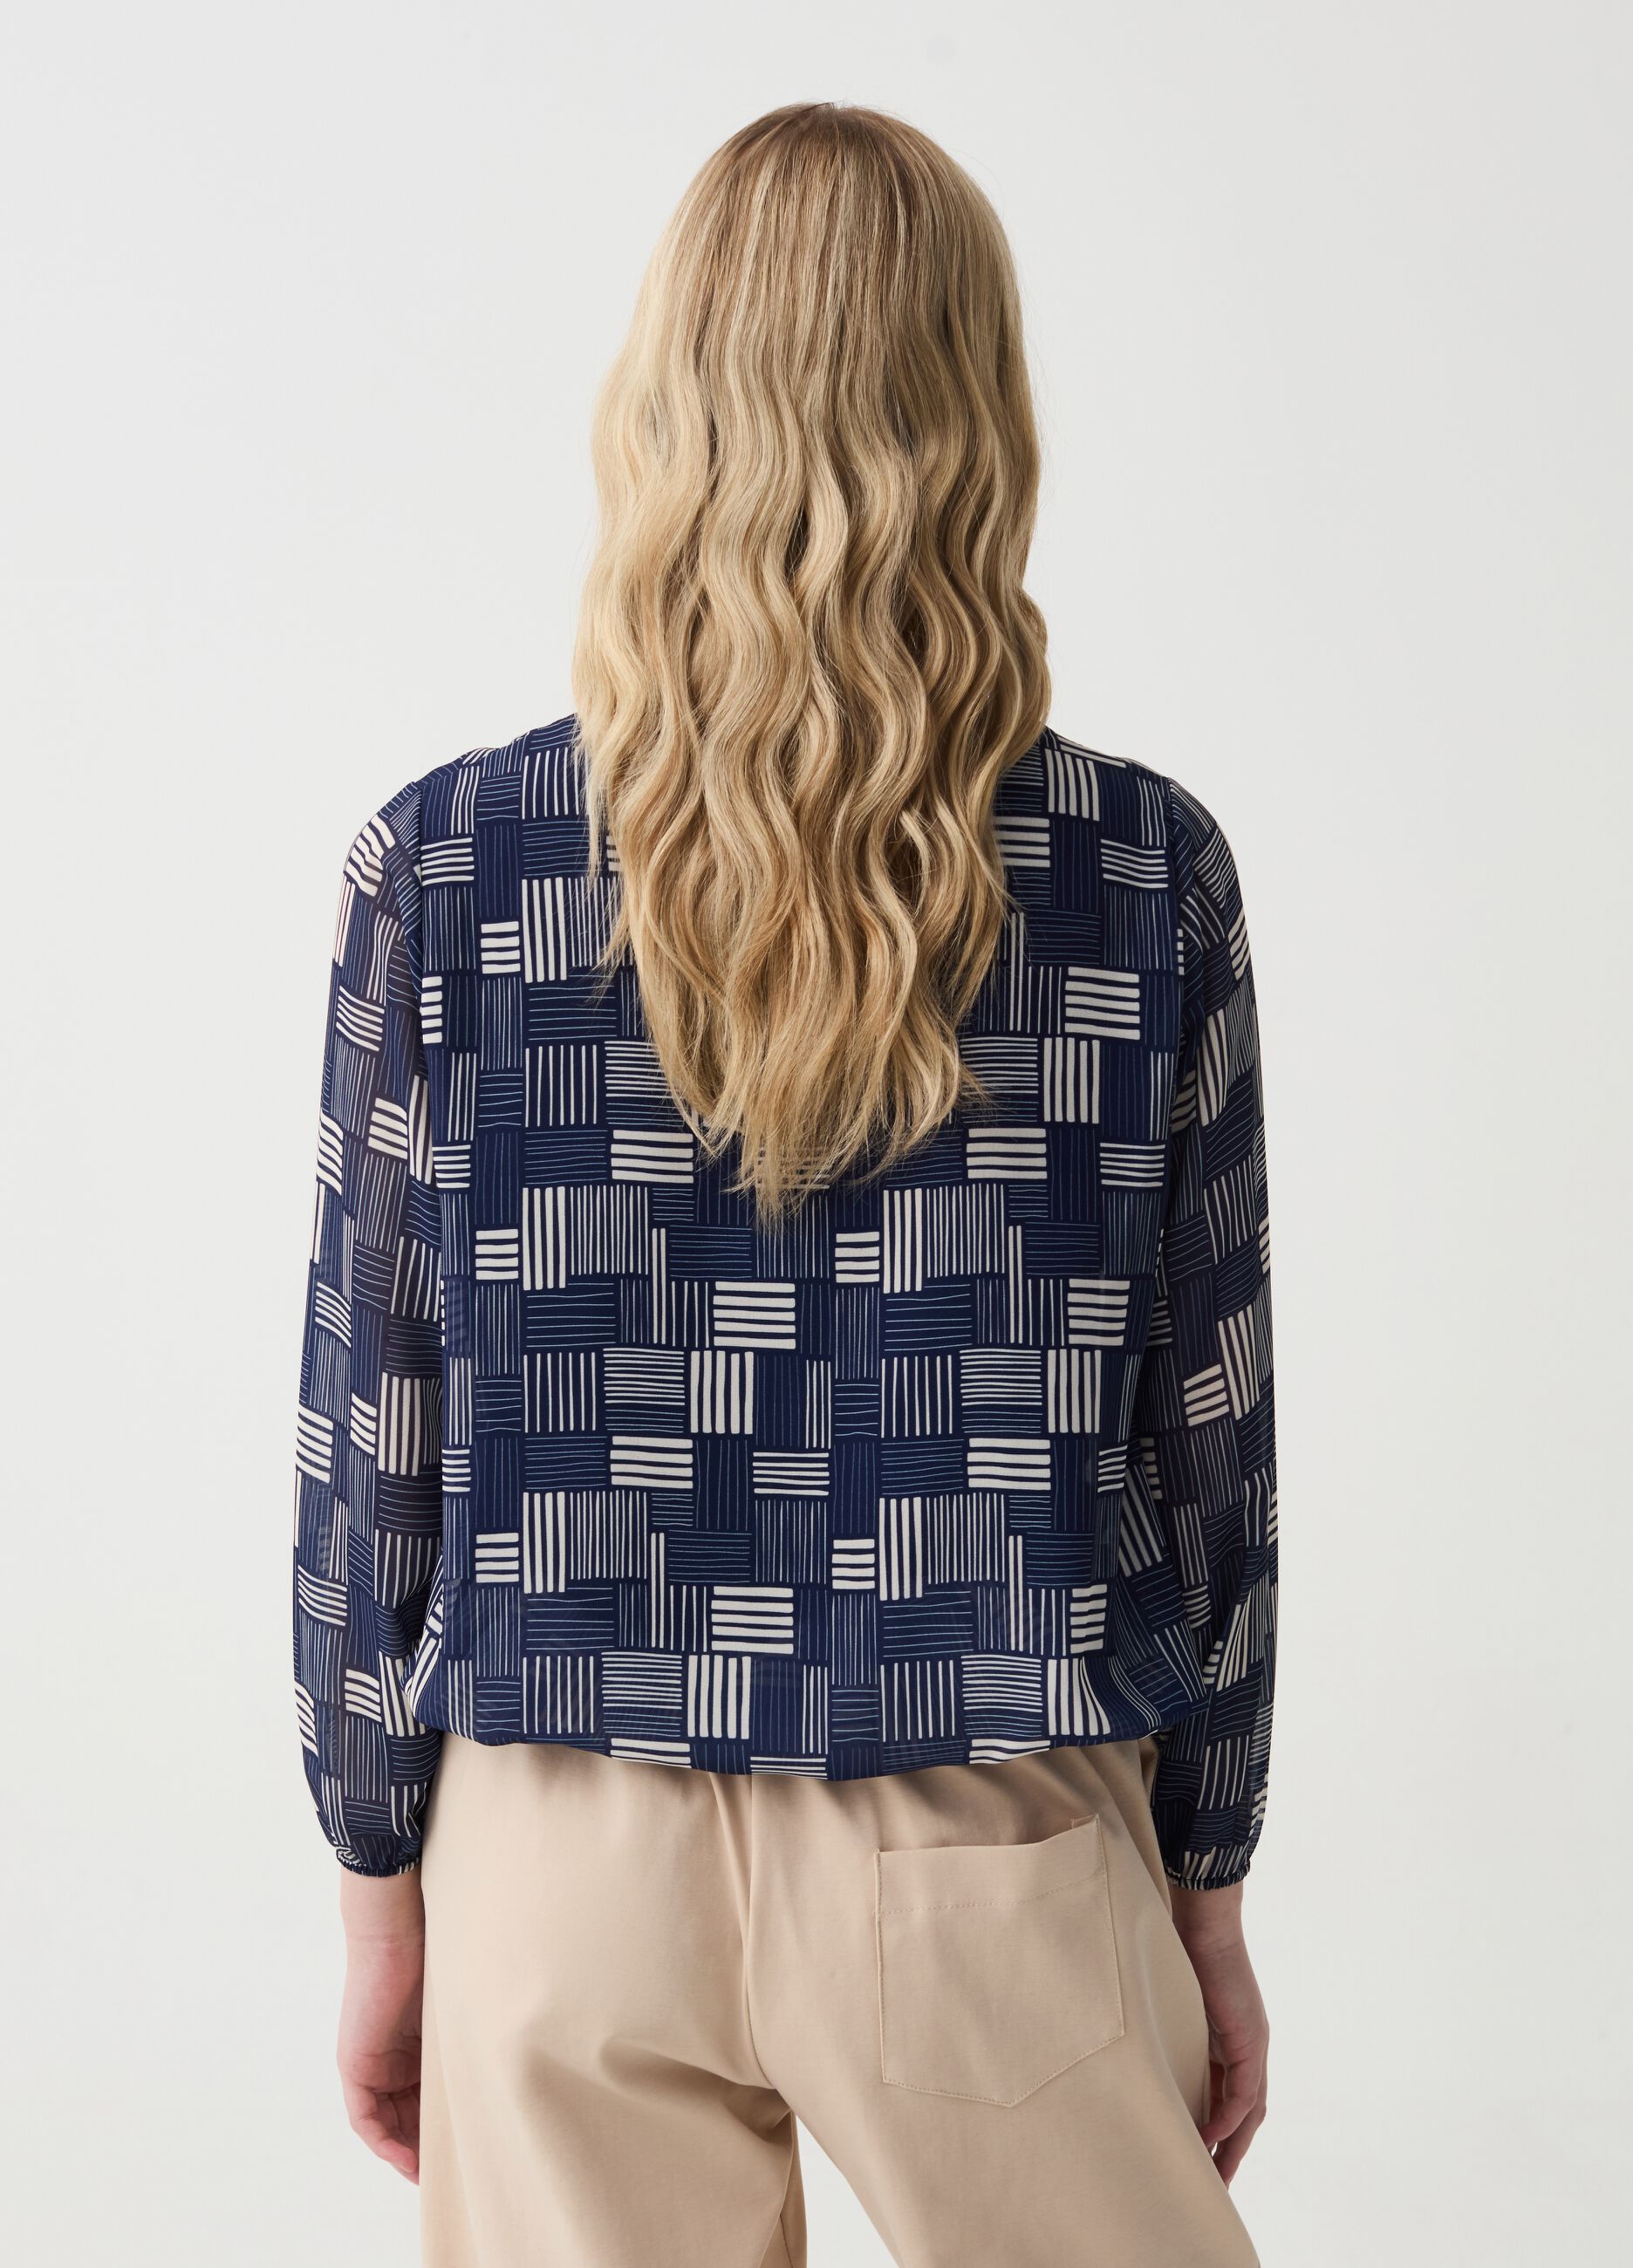 Blouse with interwoven check pattern